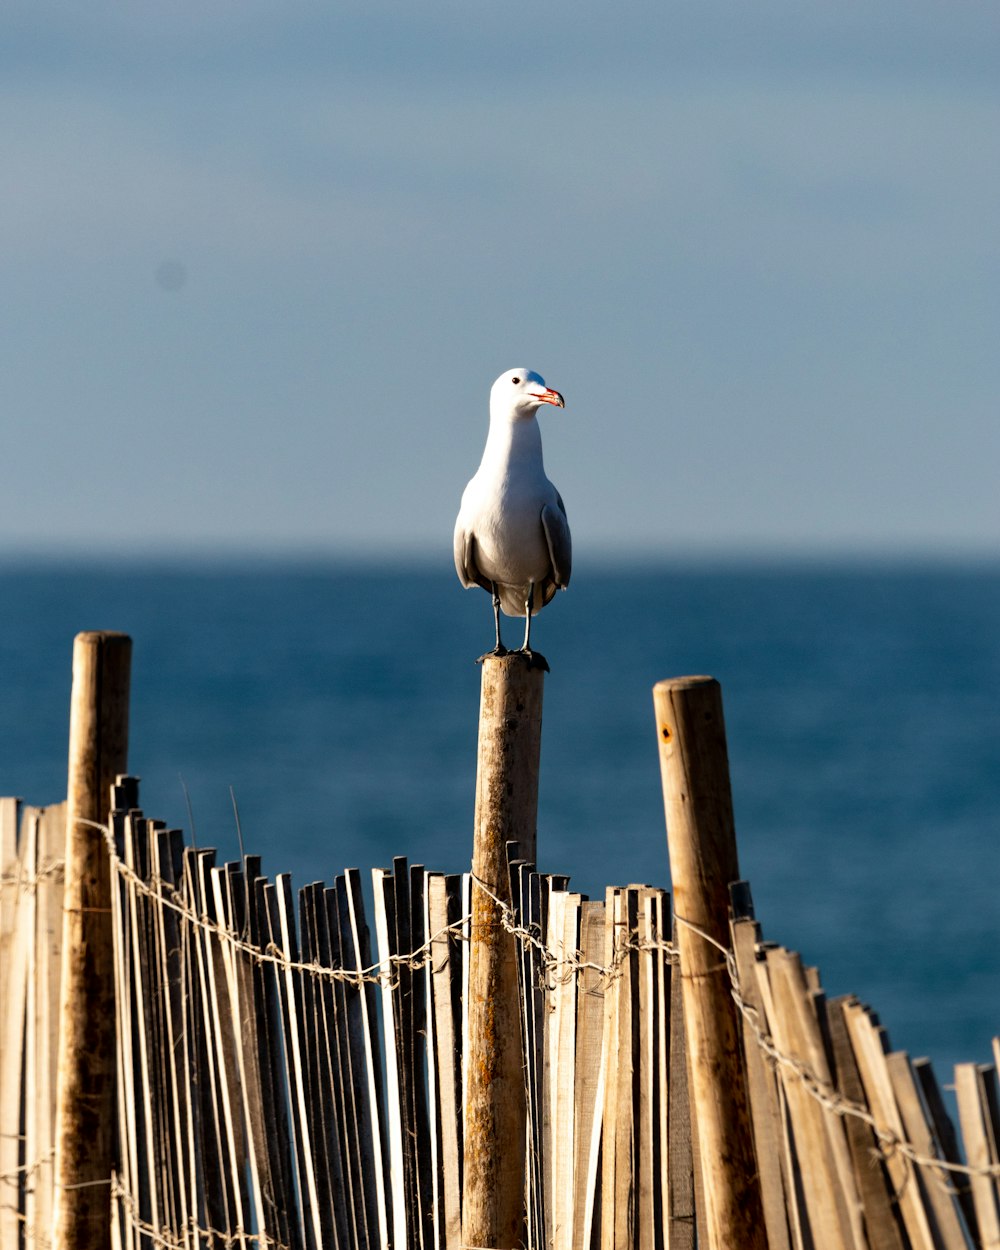 a seagull sitting on a wooden fence by the ocean